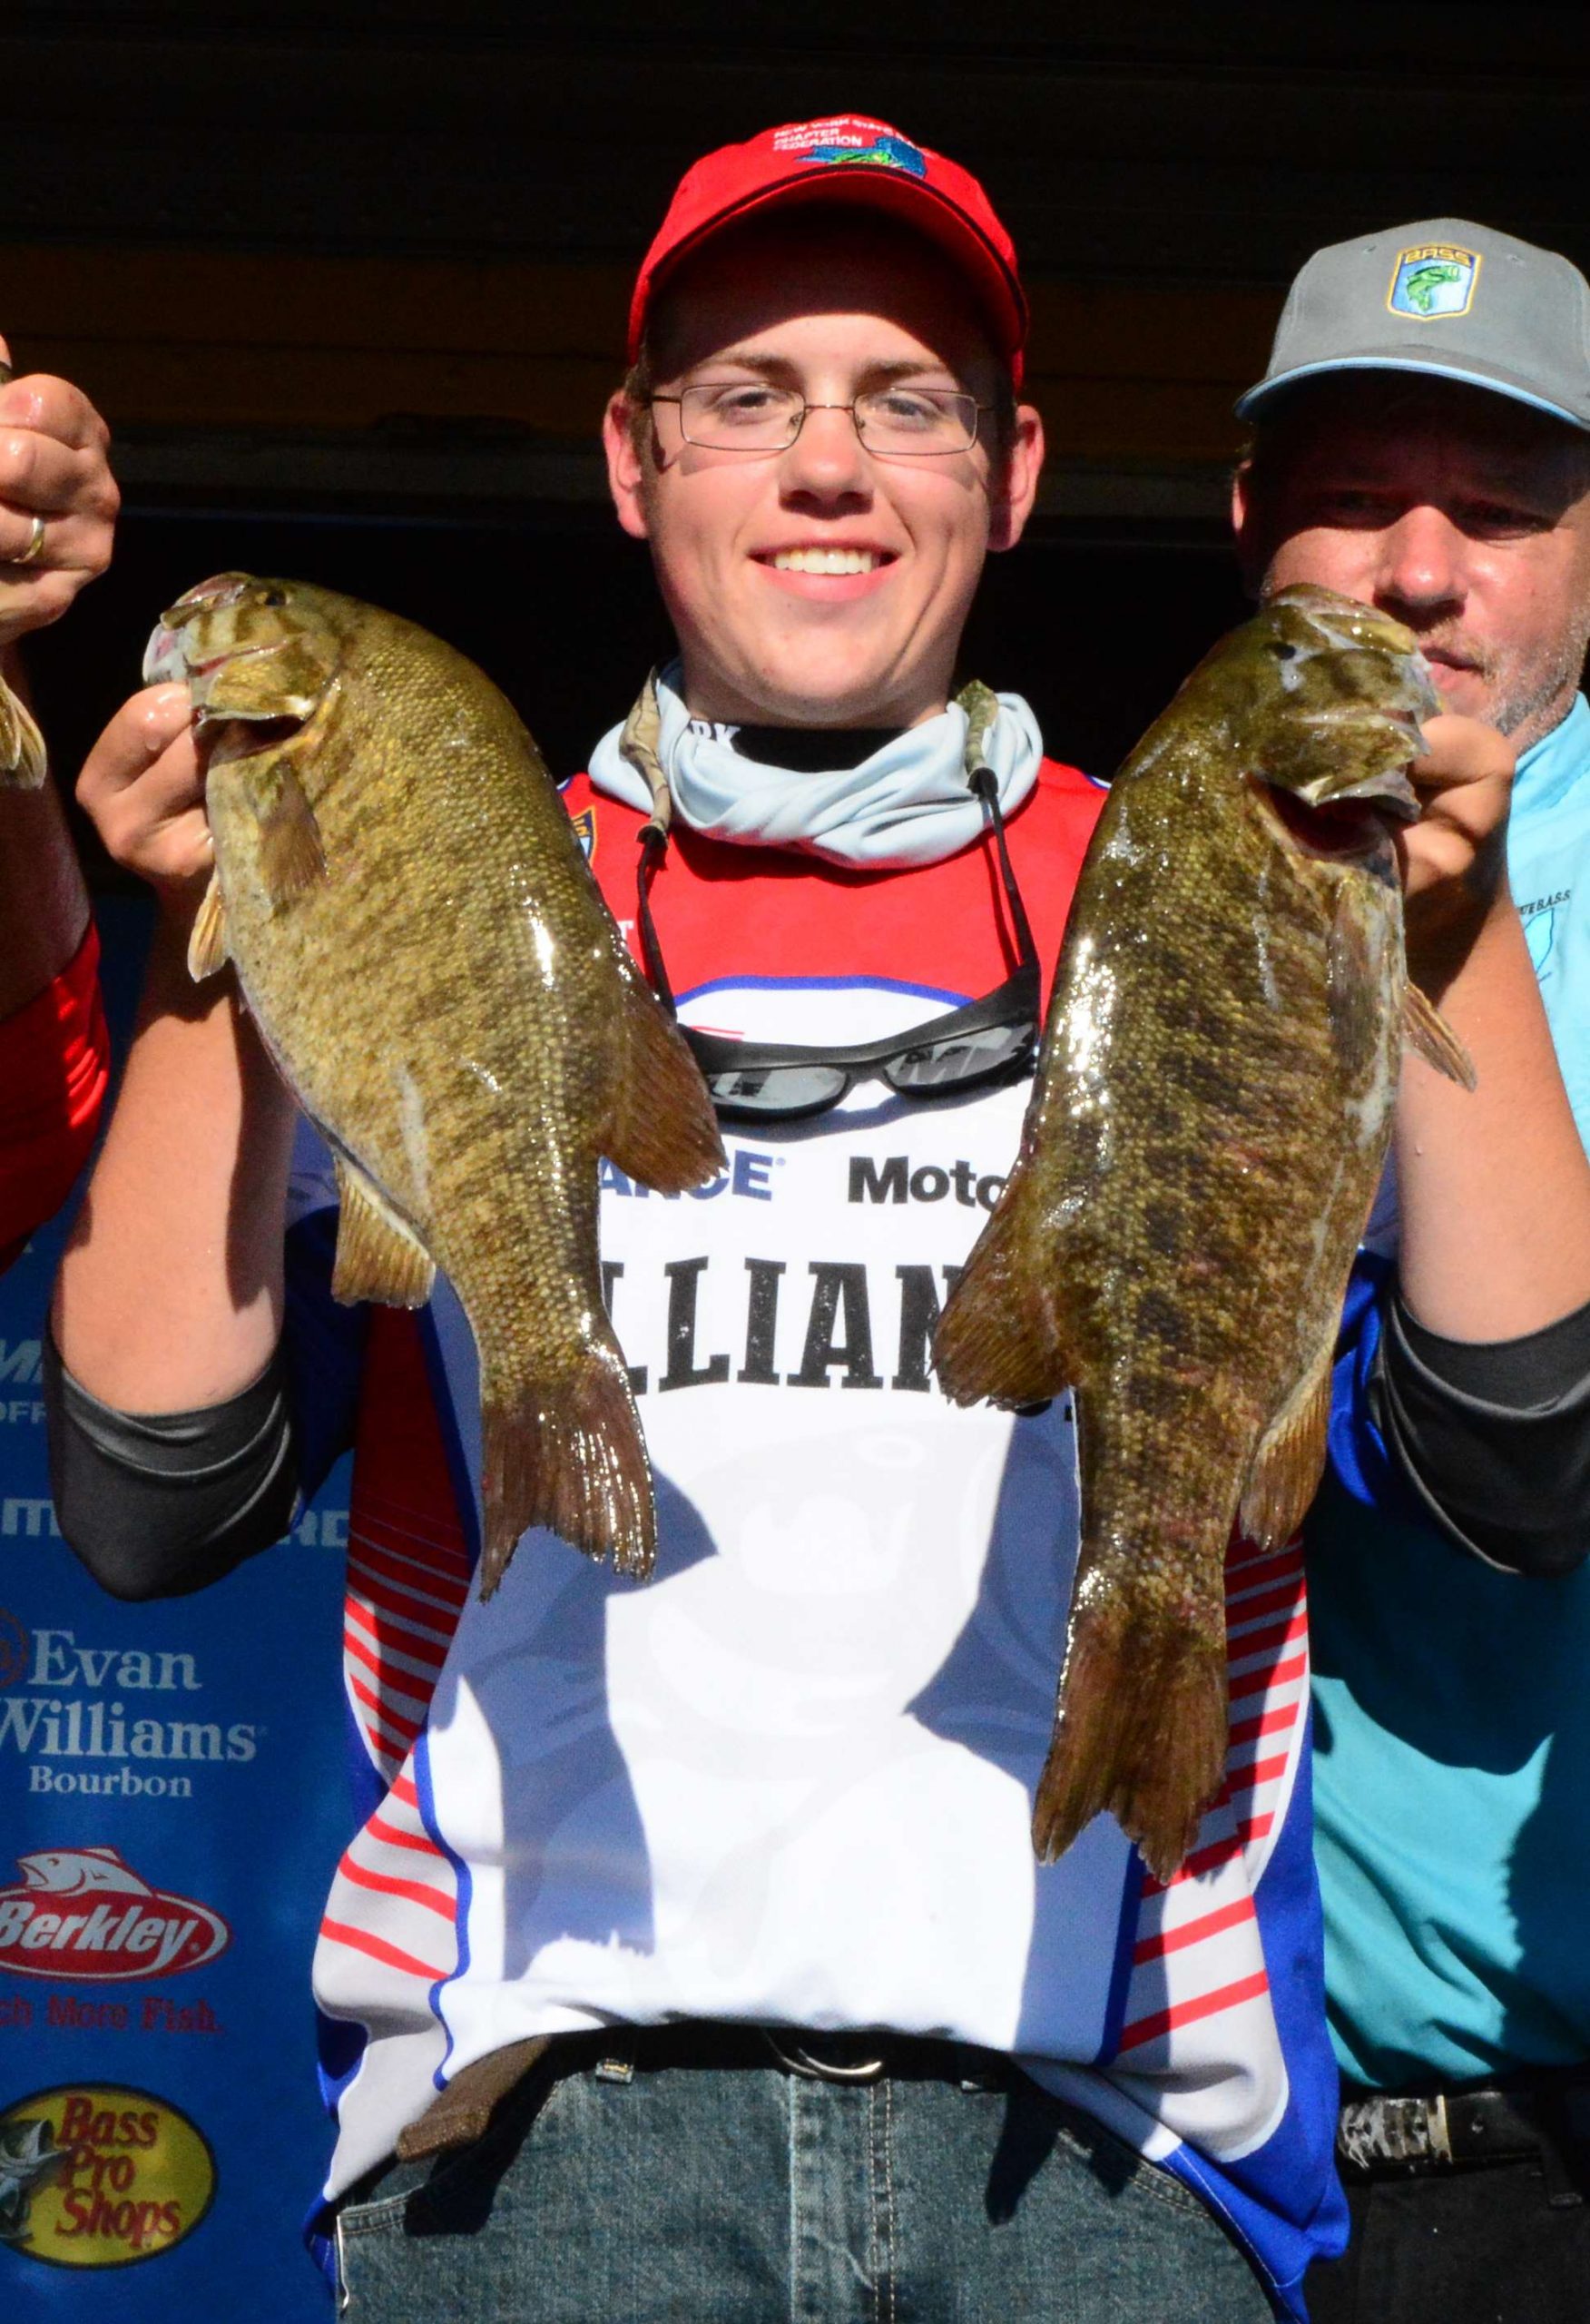 <p>New York: Michael Arndt</p>
<p>
Arndt is in 11th grade at Cicero North Syracuse High School. He and his partner were runners-up in the TBF New York High School Qualifier last summer, and Arndt finished second place last fall in the B.A.S.S. Nation High School Eastern Divisional. He is the 2014 Good Ole Boys Junior Bassmasters Junior-Pro Angler of the Year. Arndt earned the New York B.A.S.S. Nation President's Award.